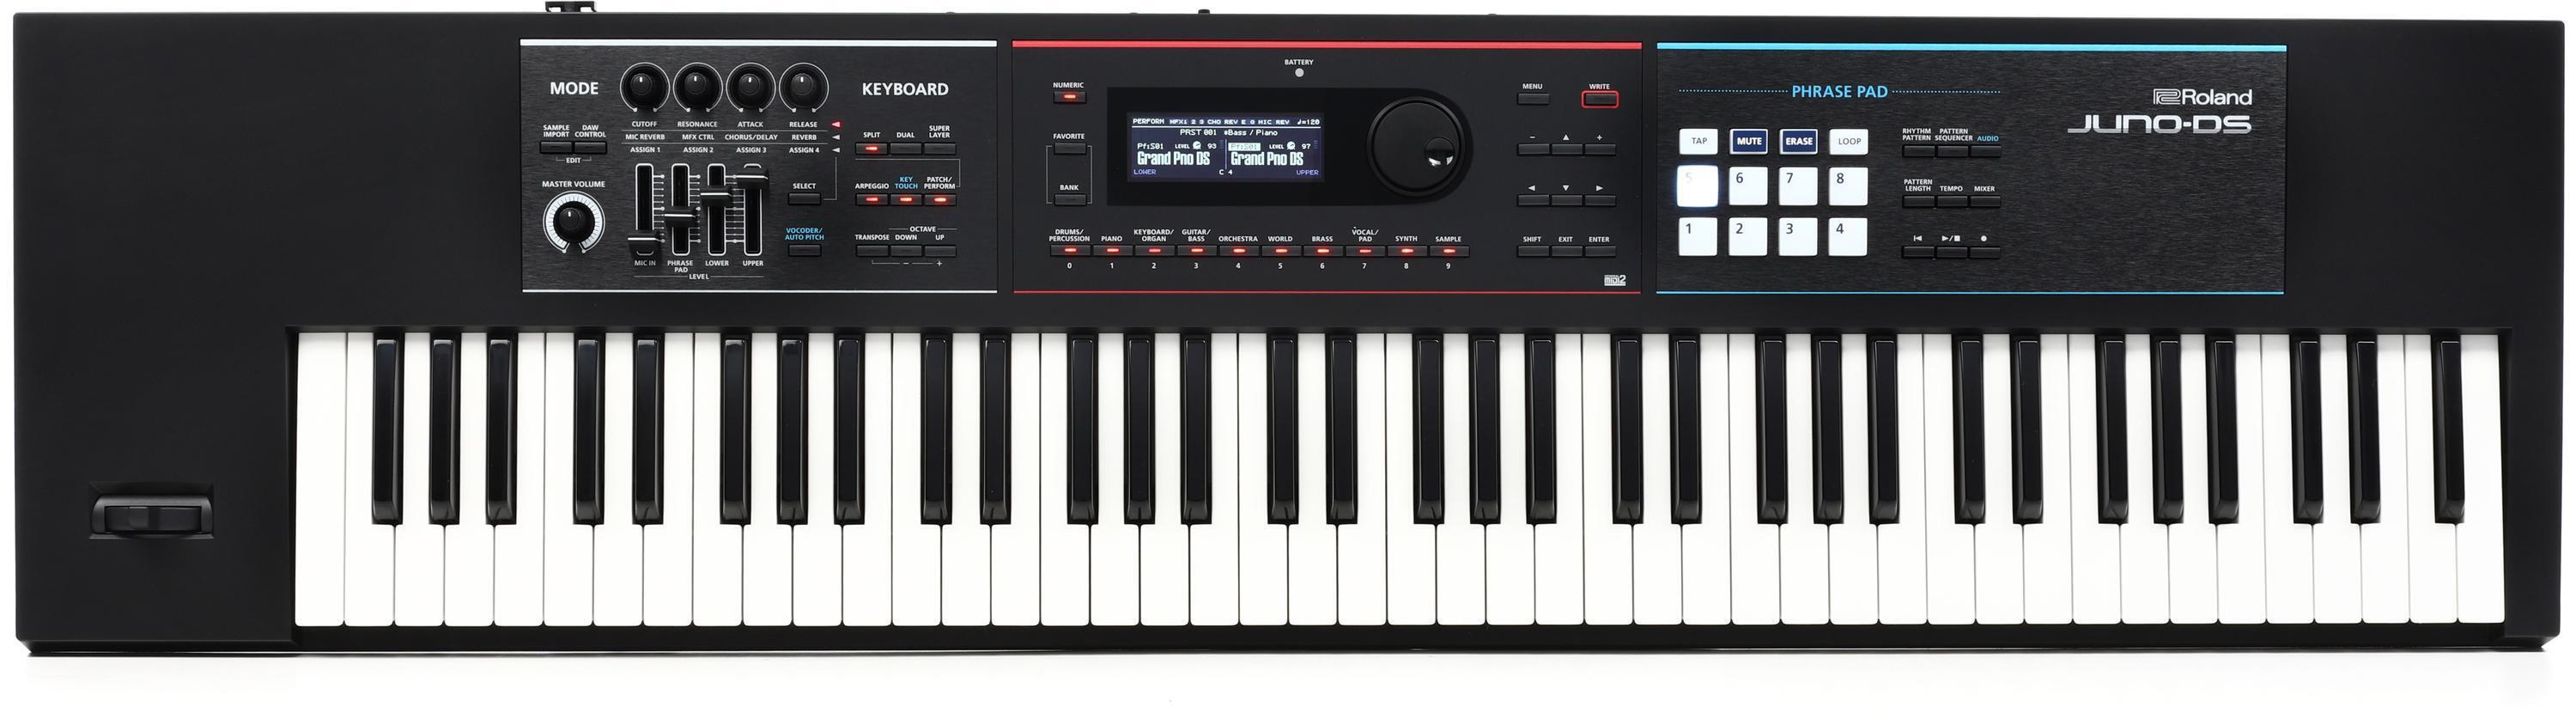 Roland JUNO-DS88 88-key Synthesizer | Sweetwater